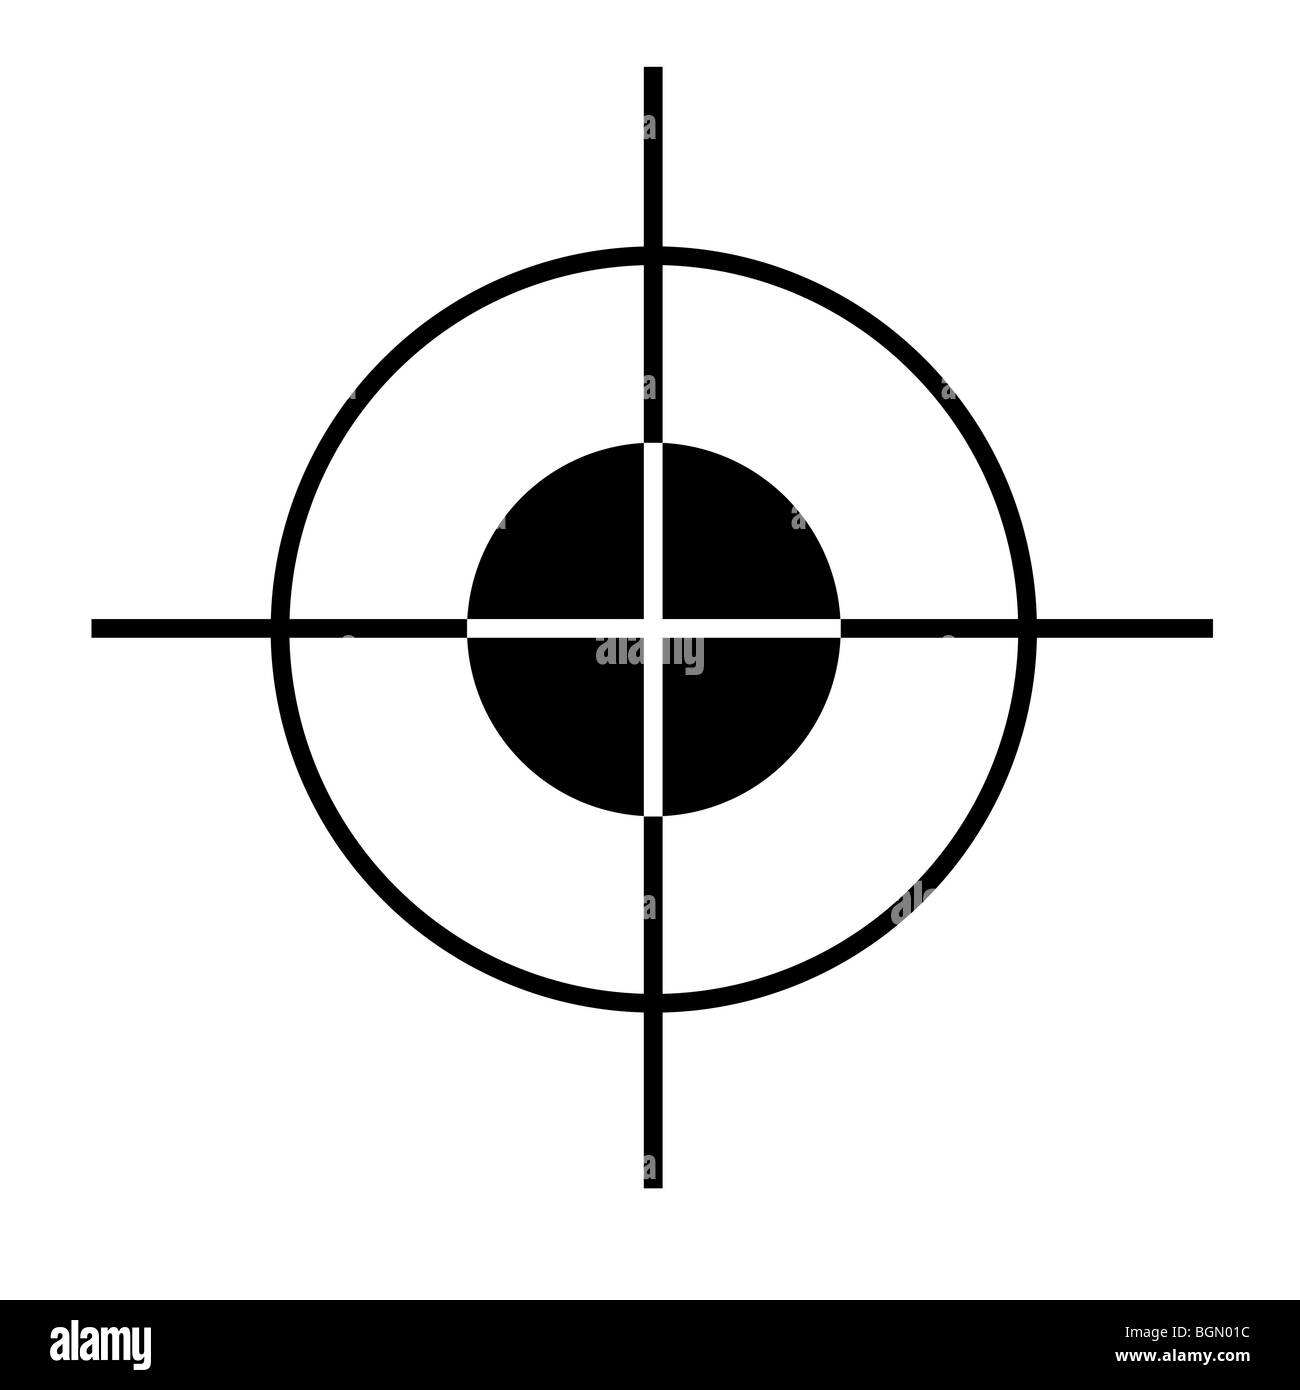 Sniper rifle target cross hairs silhouetted on white background. Stock Photo